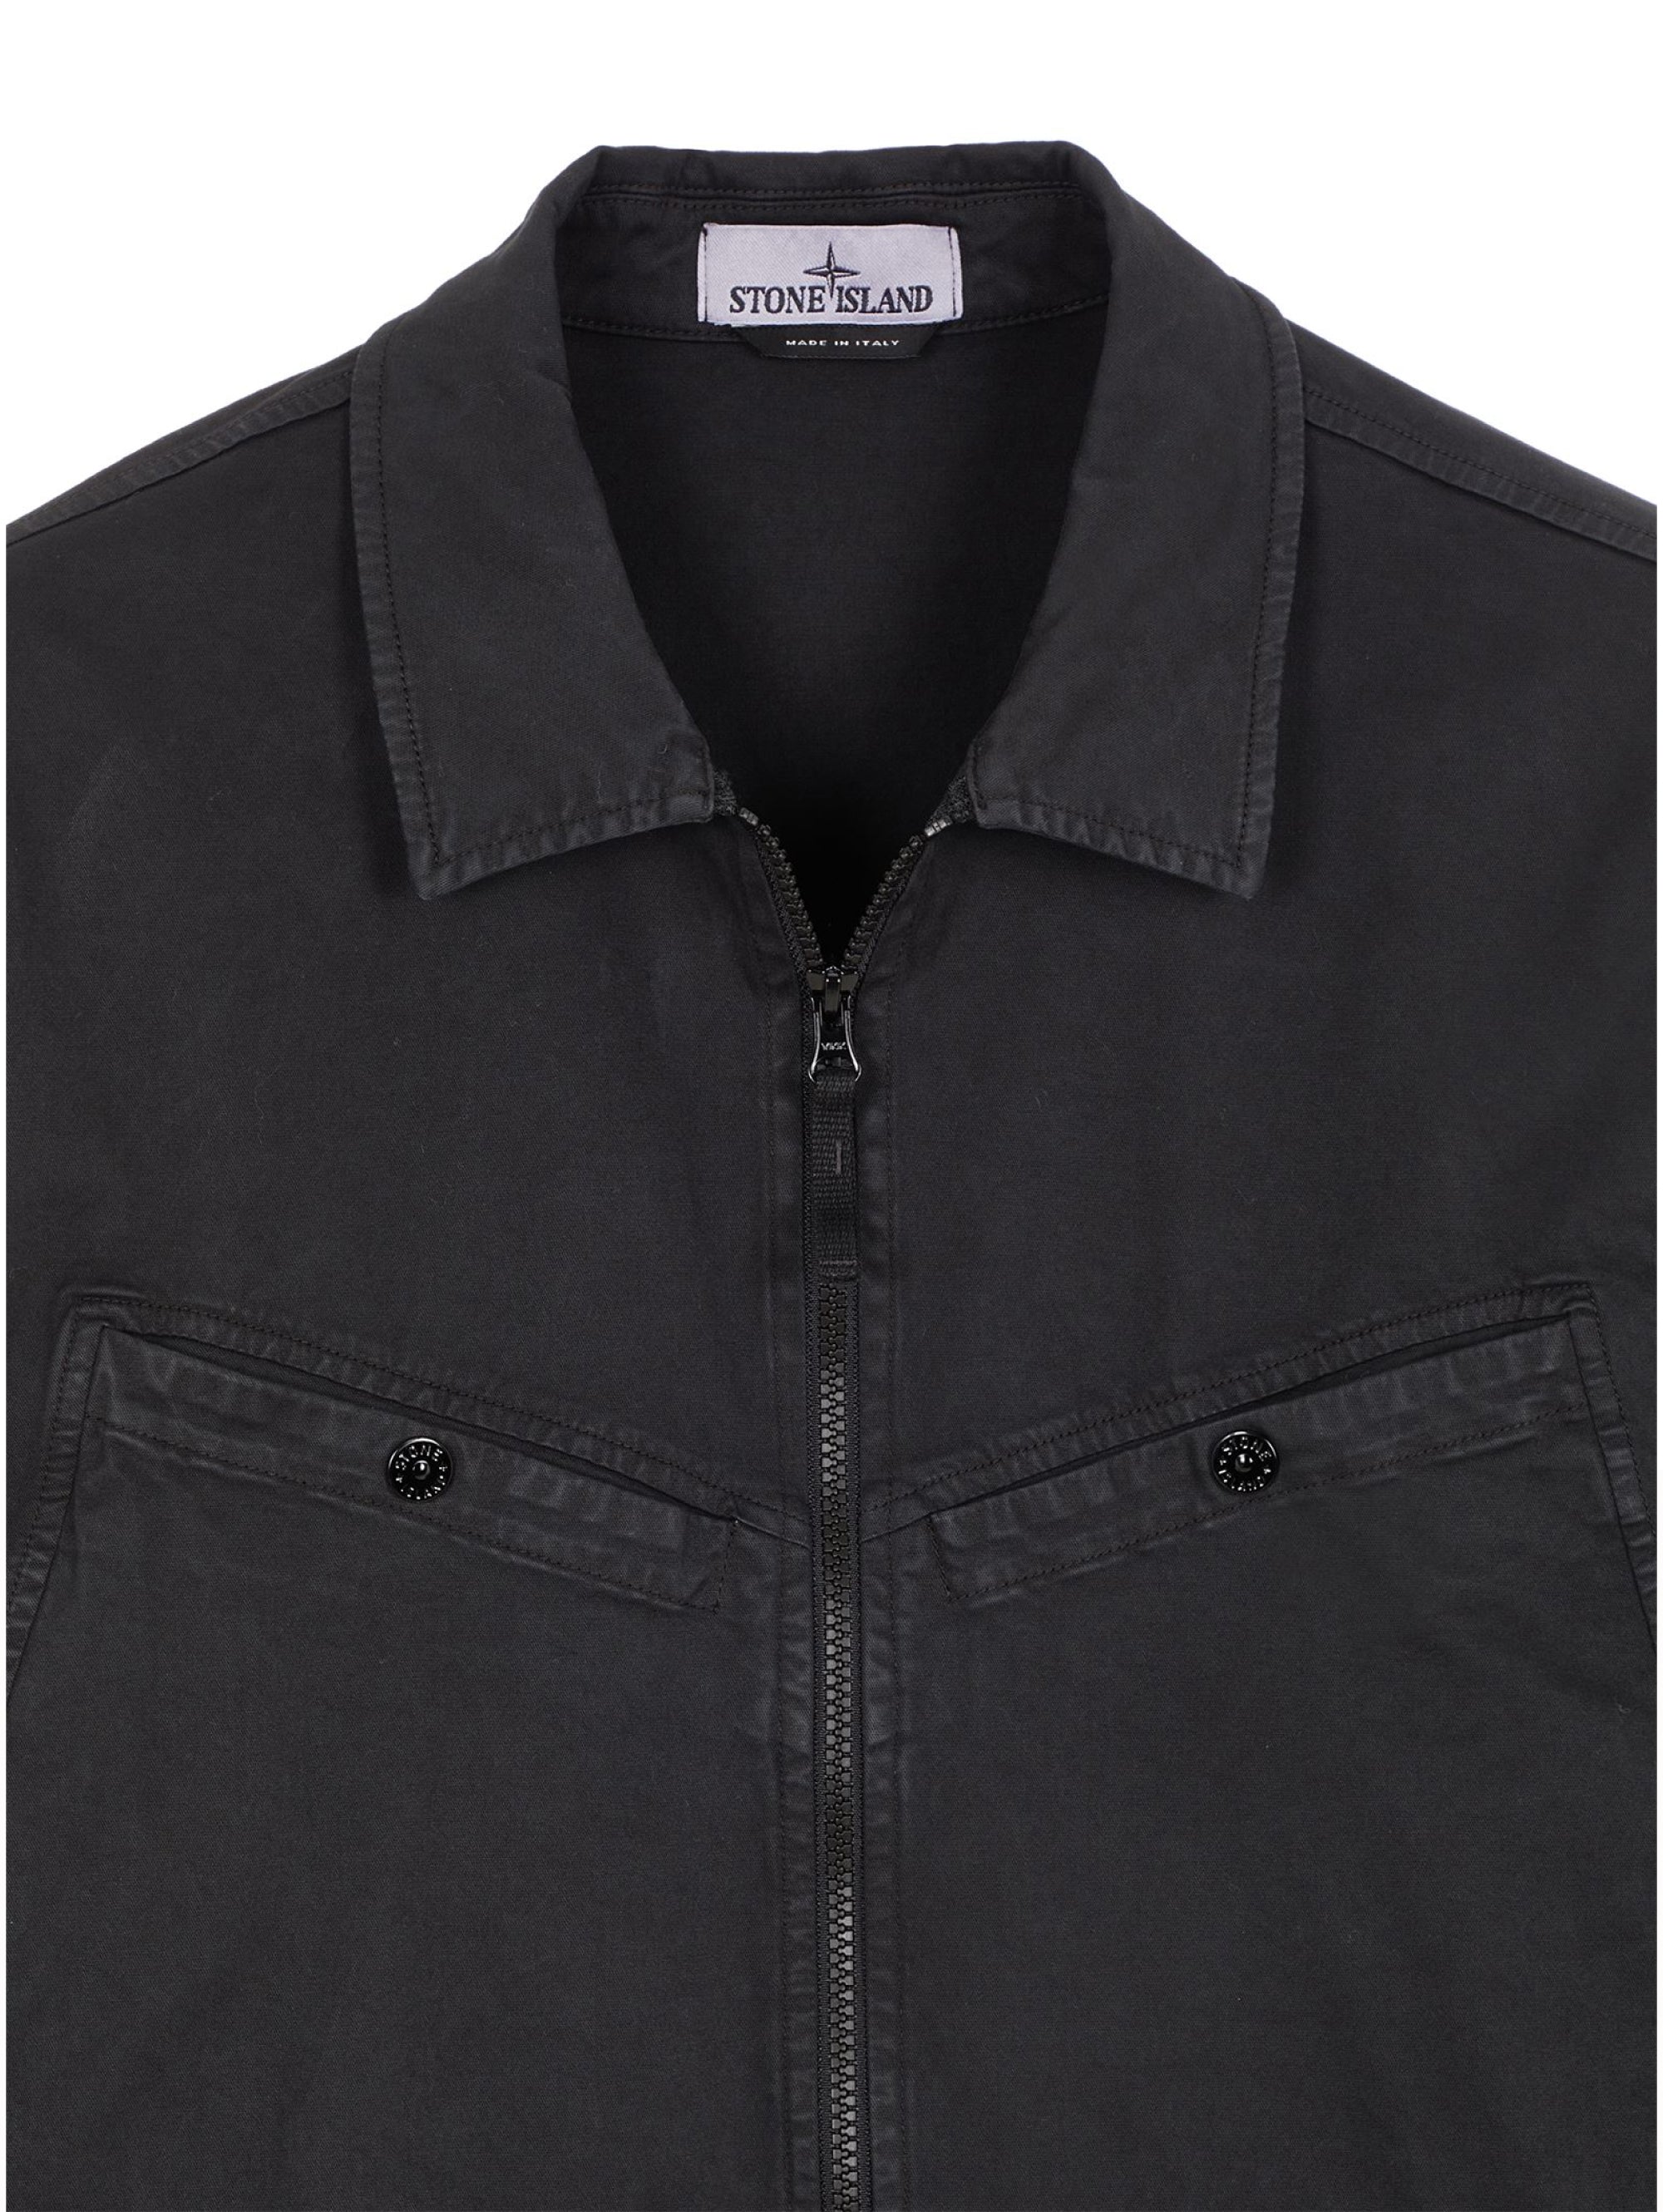 Overshirt in Organic Twill with Old Black treatment